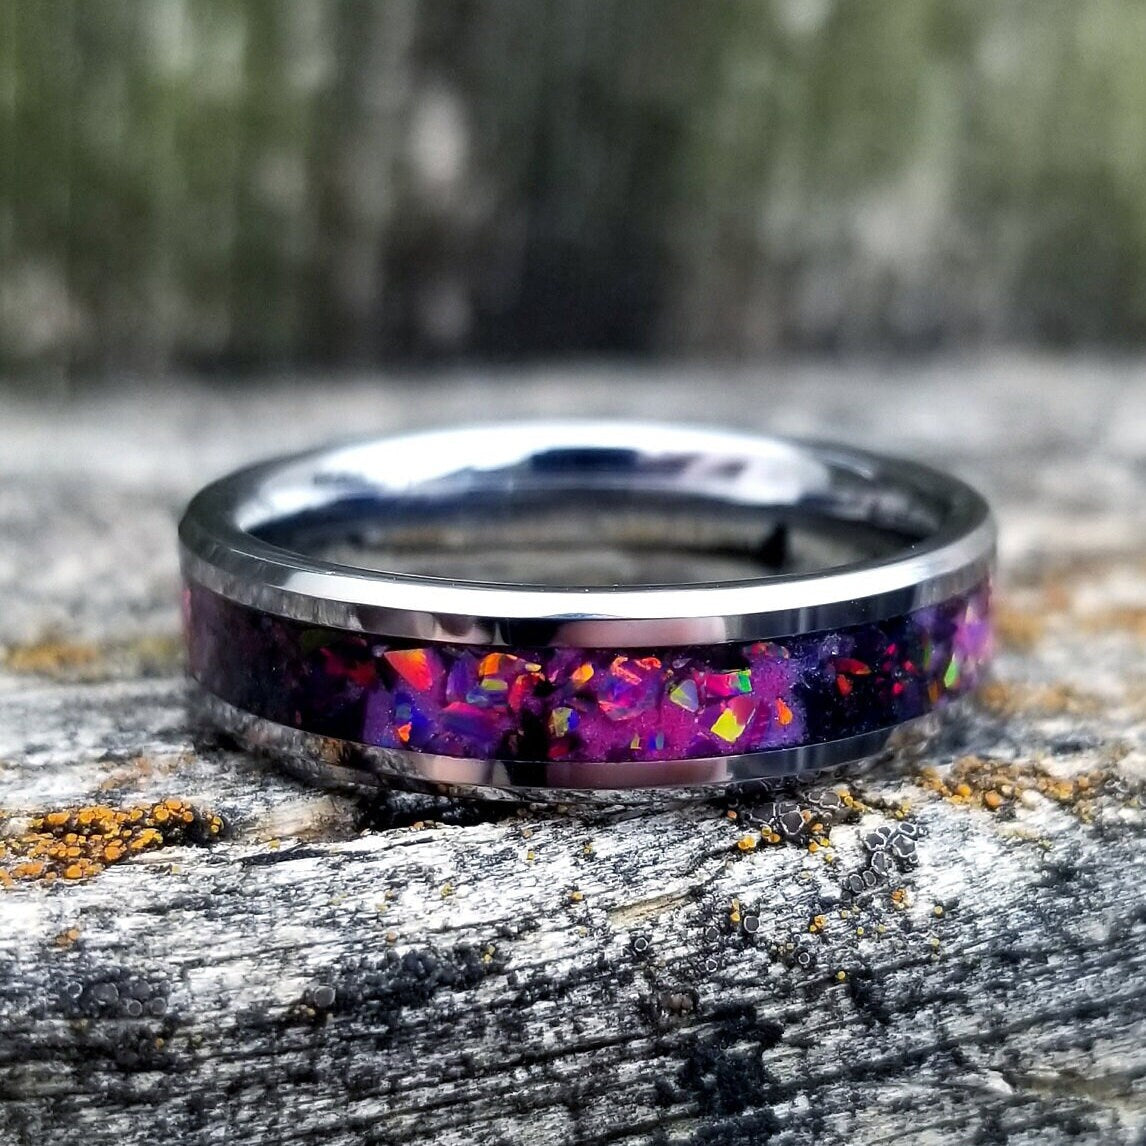 His & Hers Opal Rings - Tungsten Carbide Ring Set with Red Fire Opal & Glowstone Inlay - 8mm & 6mm Rings - Sizes 5-13 - Orth Custom Rings